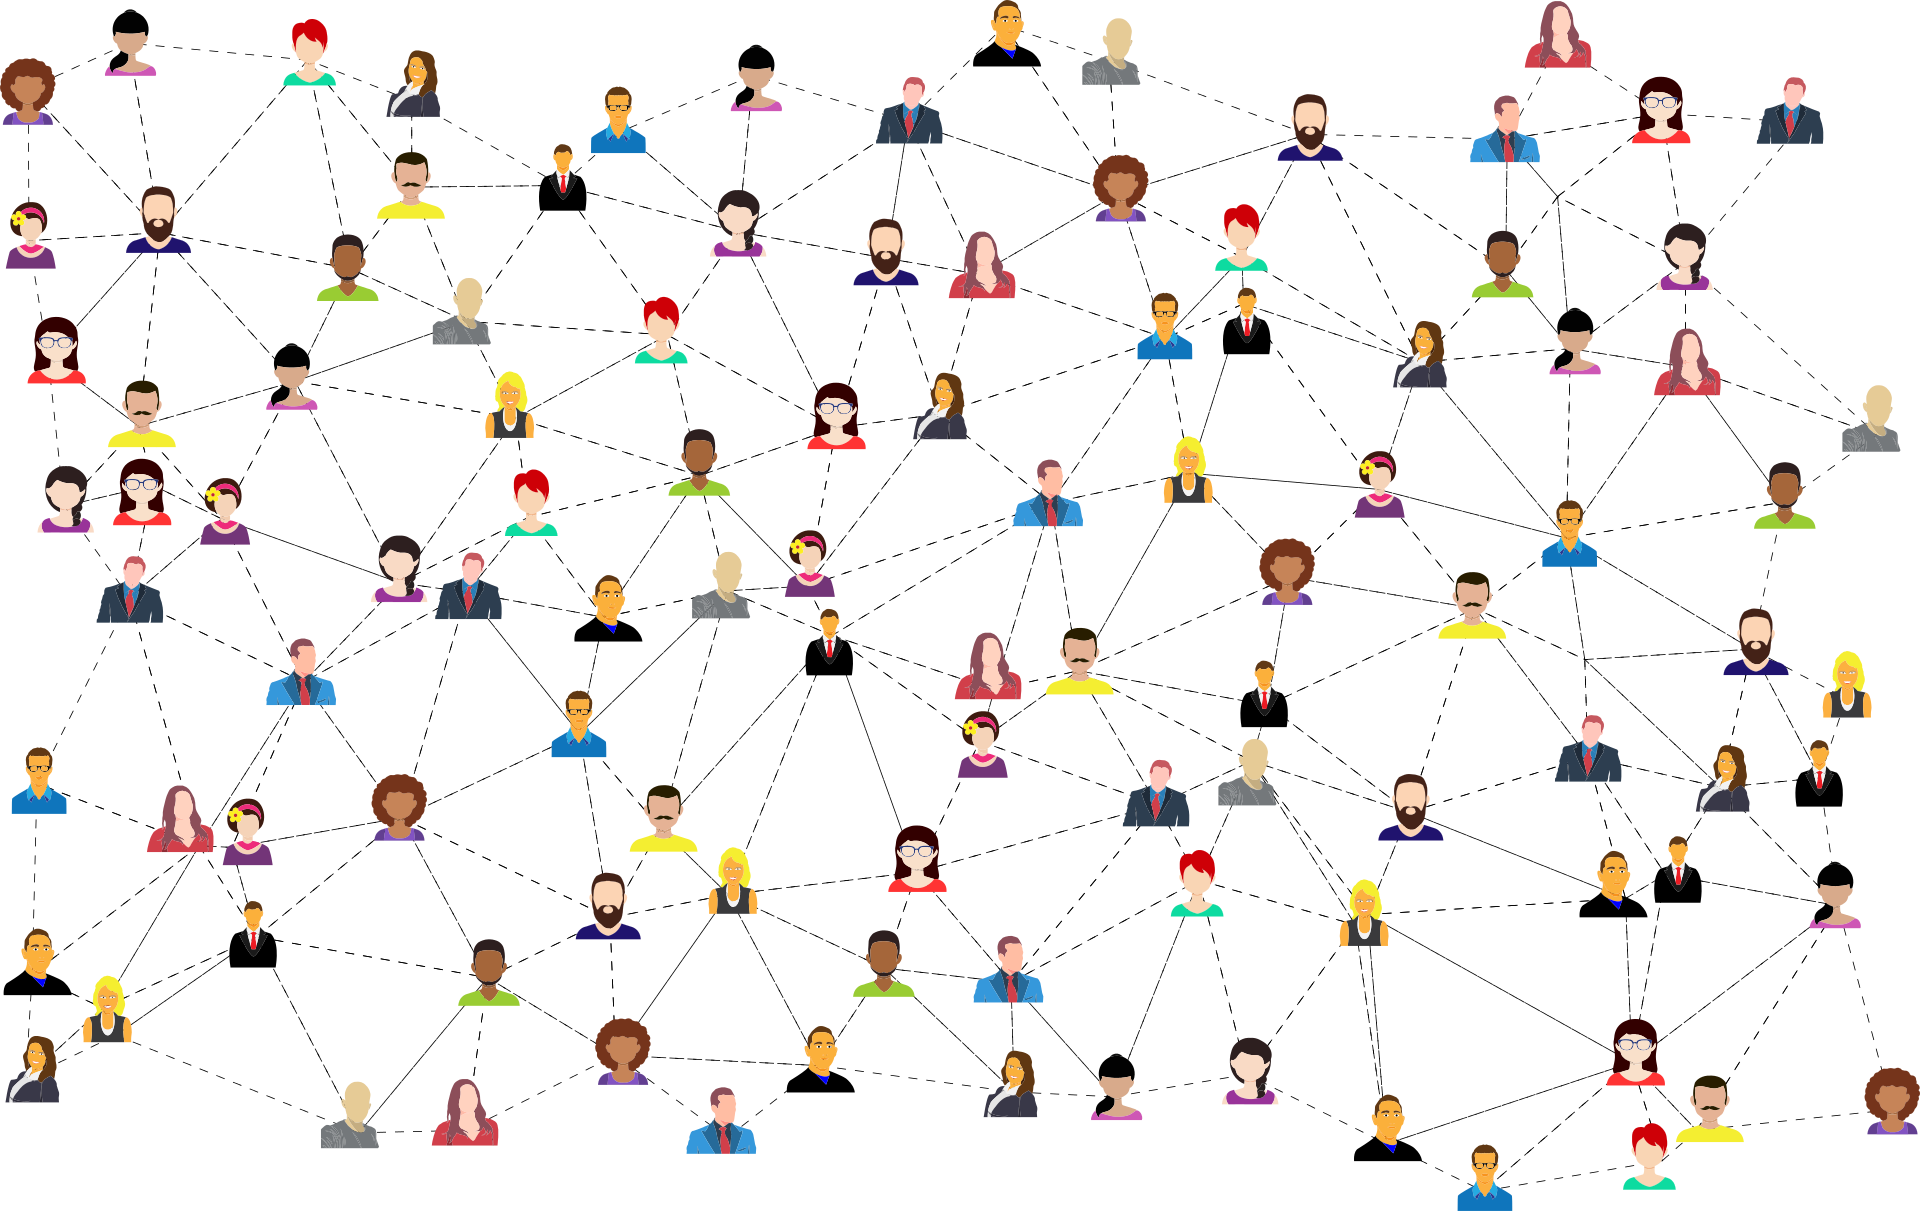 Cartoon people linked by connections, just as they would be on social media